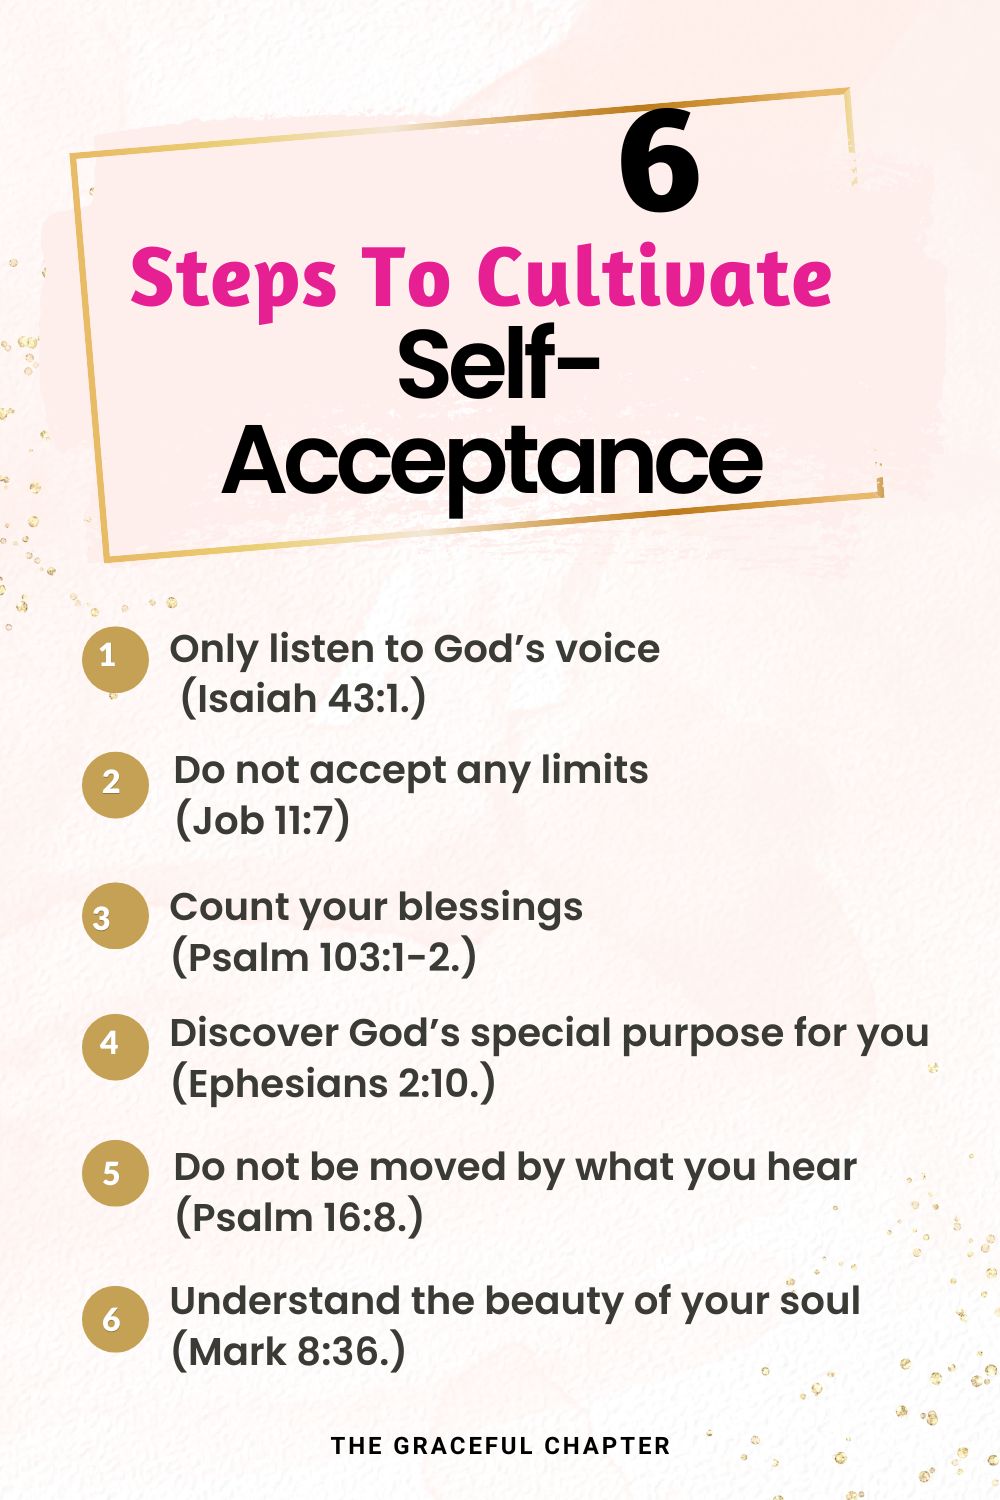 6 steps to cultivate self-acceptance